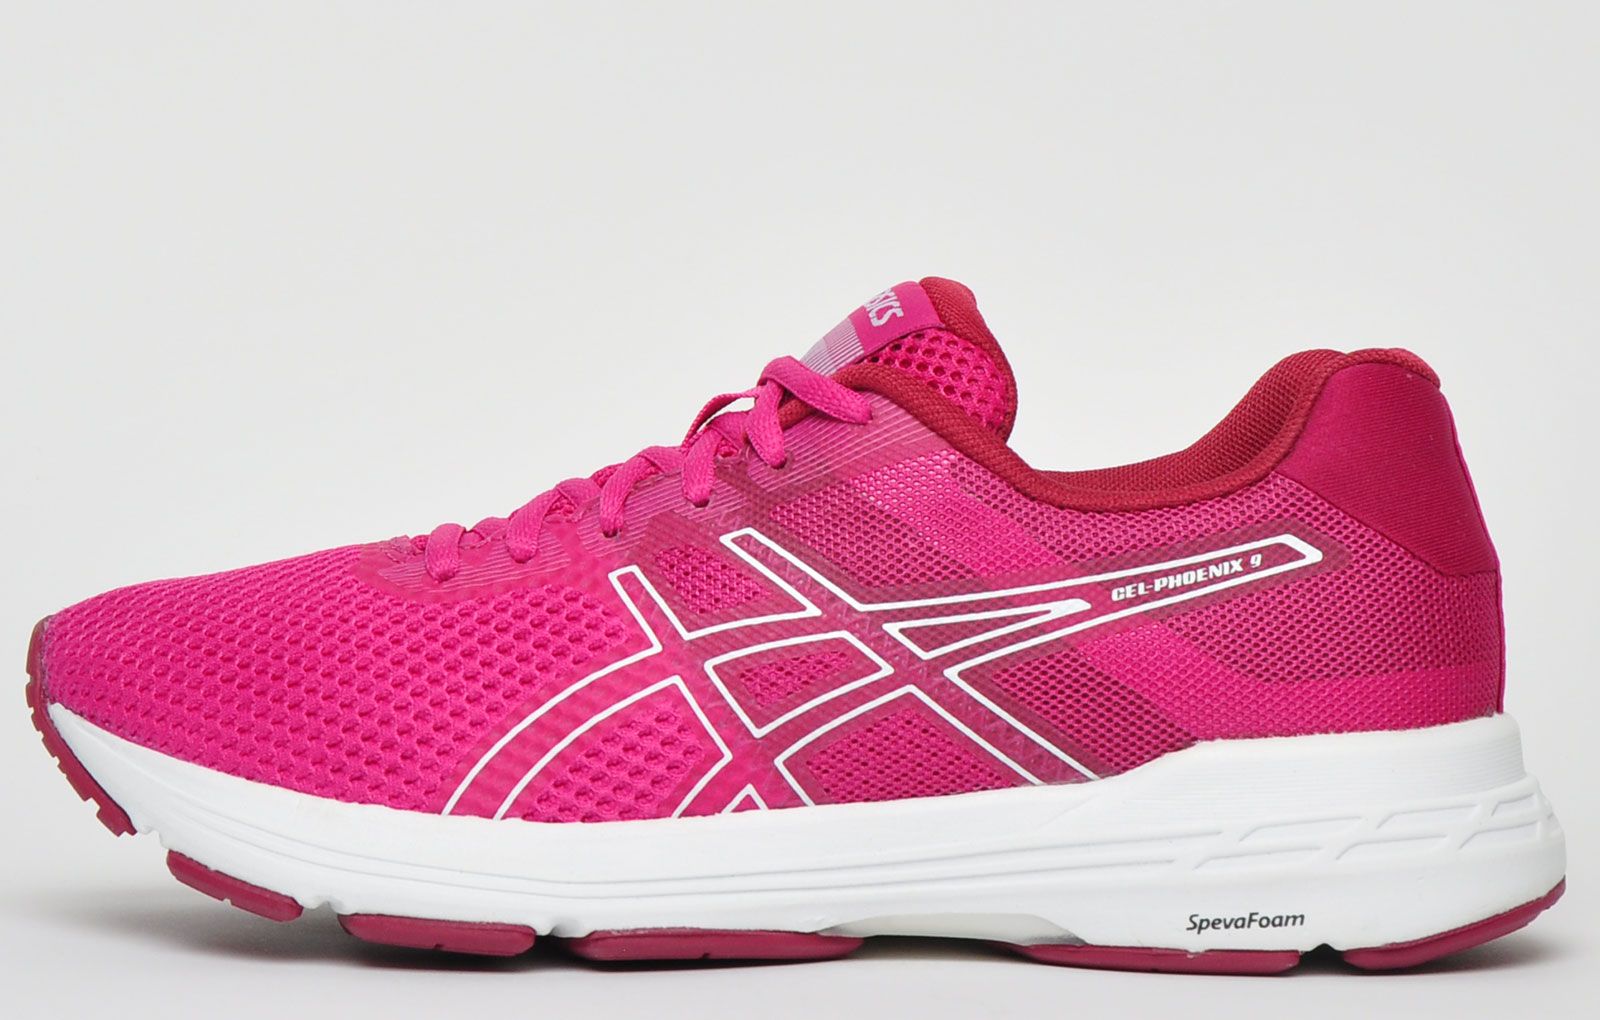 These Asics Gel Phoenix 9 womens running shoes are the ideal choice of supportive lightweight, cushioned running shoes to push you further mile after mile. These superior womens running shoes feature a rearfoot Gel cushioning system to absorb shock during the impact phase and allow for smoother transitions, whilst a textile, mesh and synthetic mix upper keeps feet comfortable and fresh mile after mile. 
 - Breathable textile mesh upper 
 - Secure lace up fastening system 
 - Durable synthetic overlays 
 - Cushioned inner enhances comfort 
 - SpEva midsole delivers excellent energy return and cushioning 
 - AHAR+ outsole delivers superior grip and durability 
 - Gel cushioning adds impact protection 
 - Soft cushioned heel and ankle collar
 - Asics branding throughout